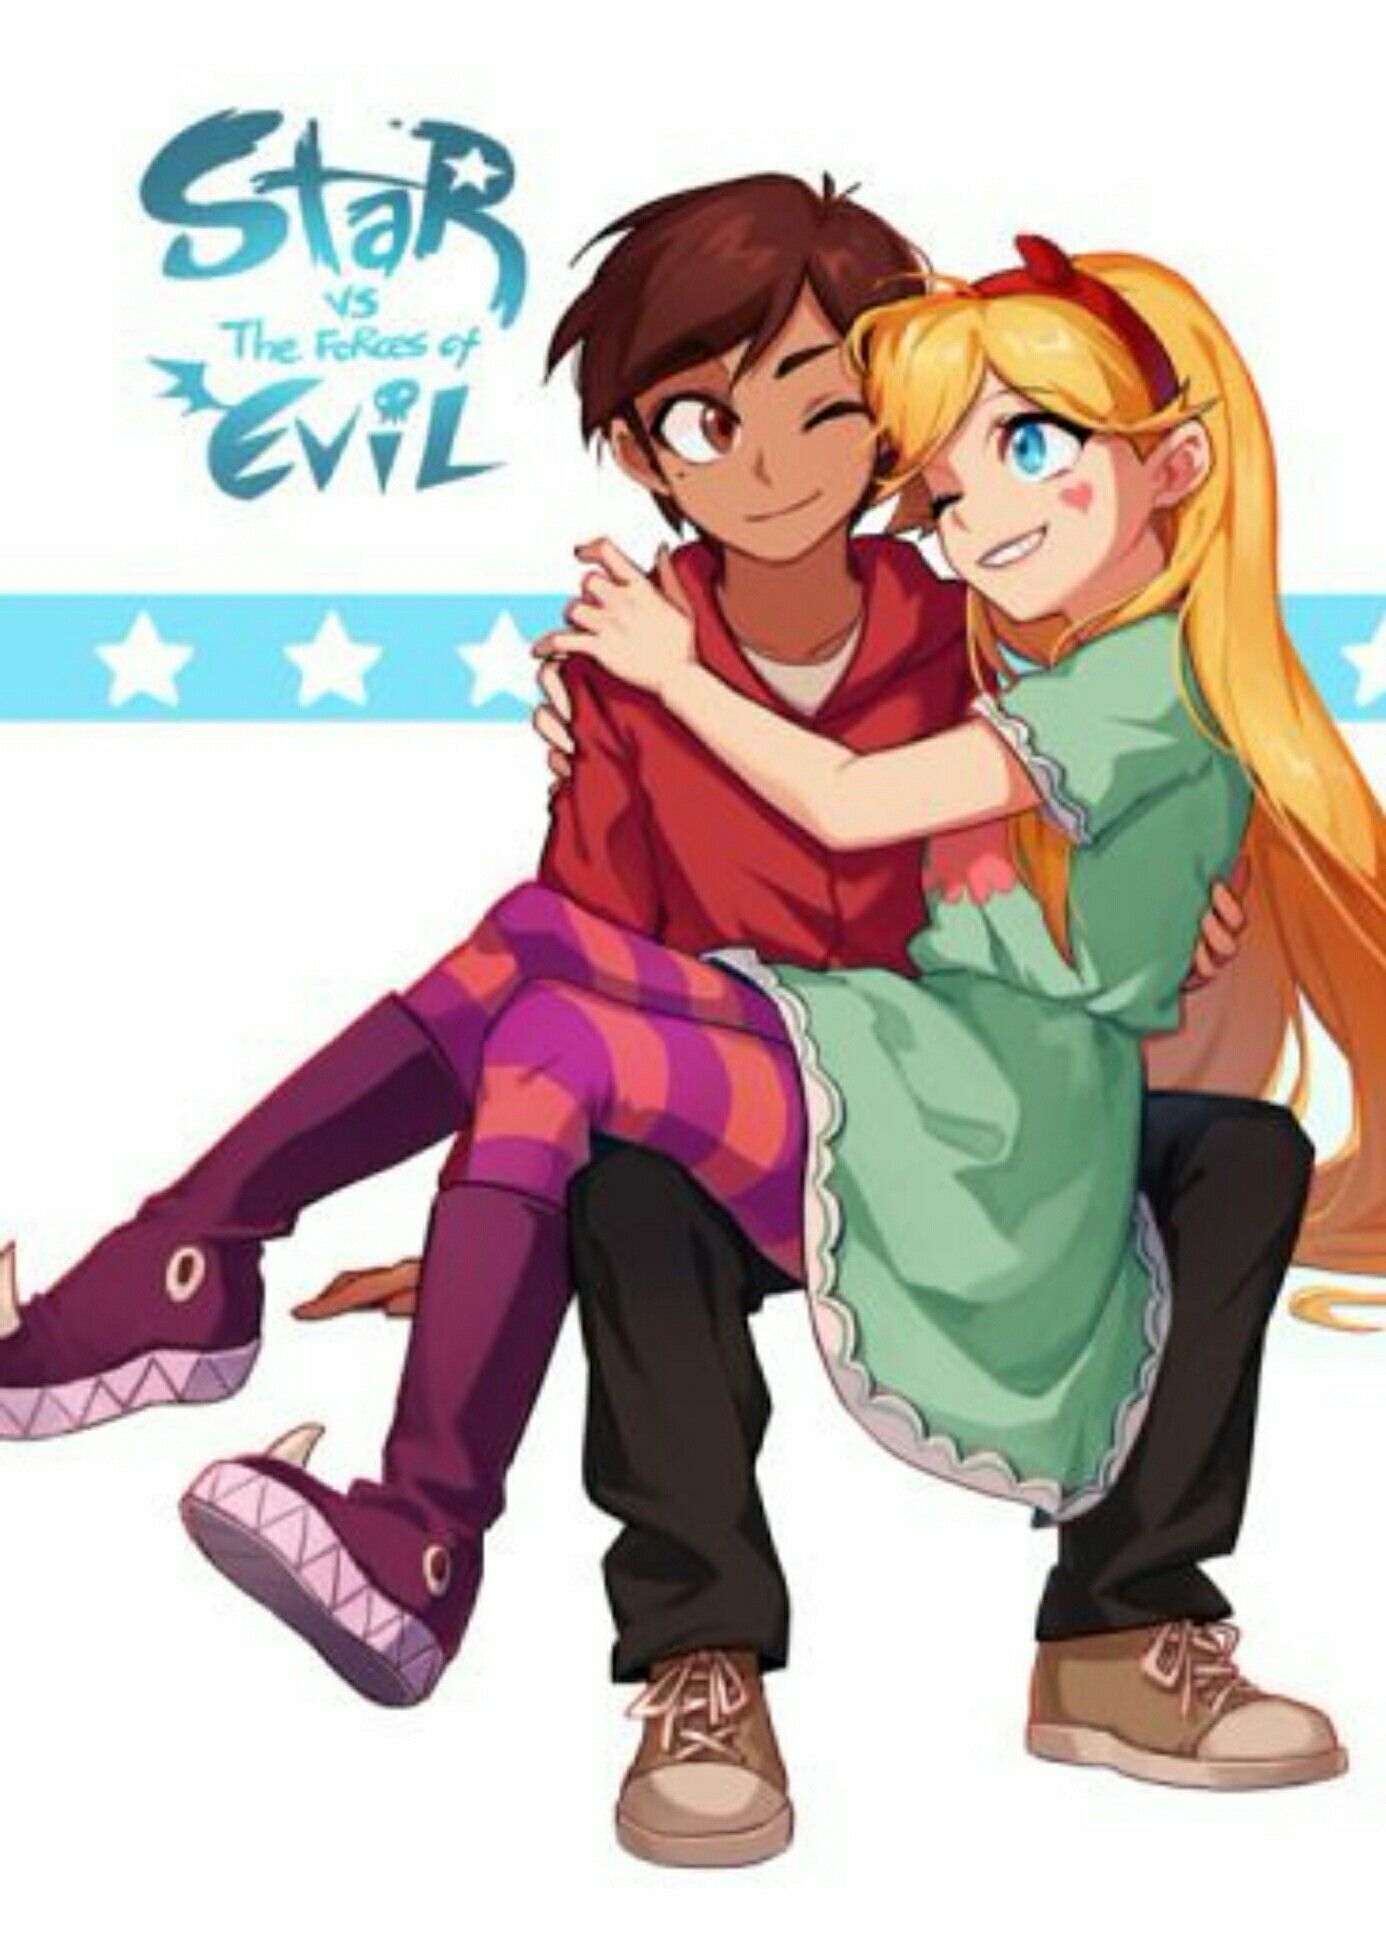 Starco. Star vs the forces of evil, Star vs the forces